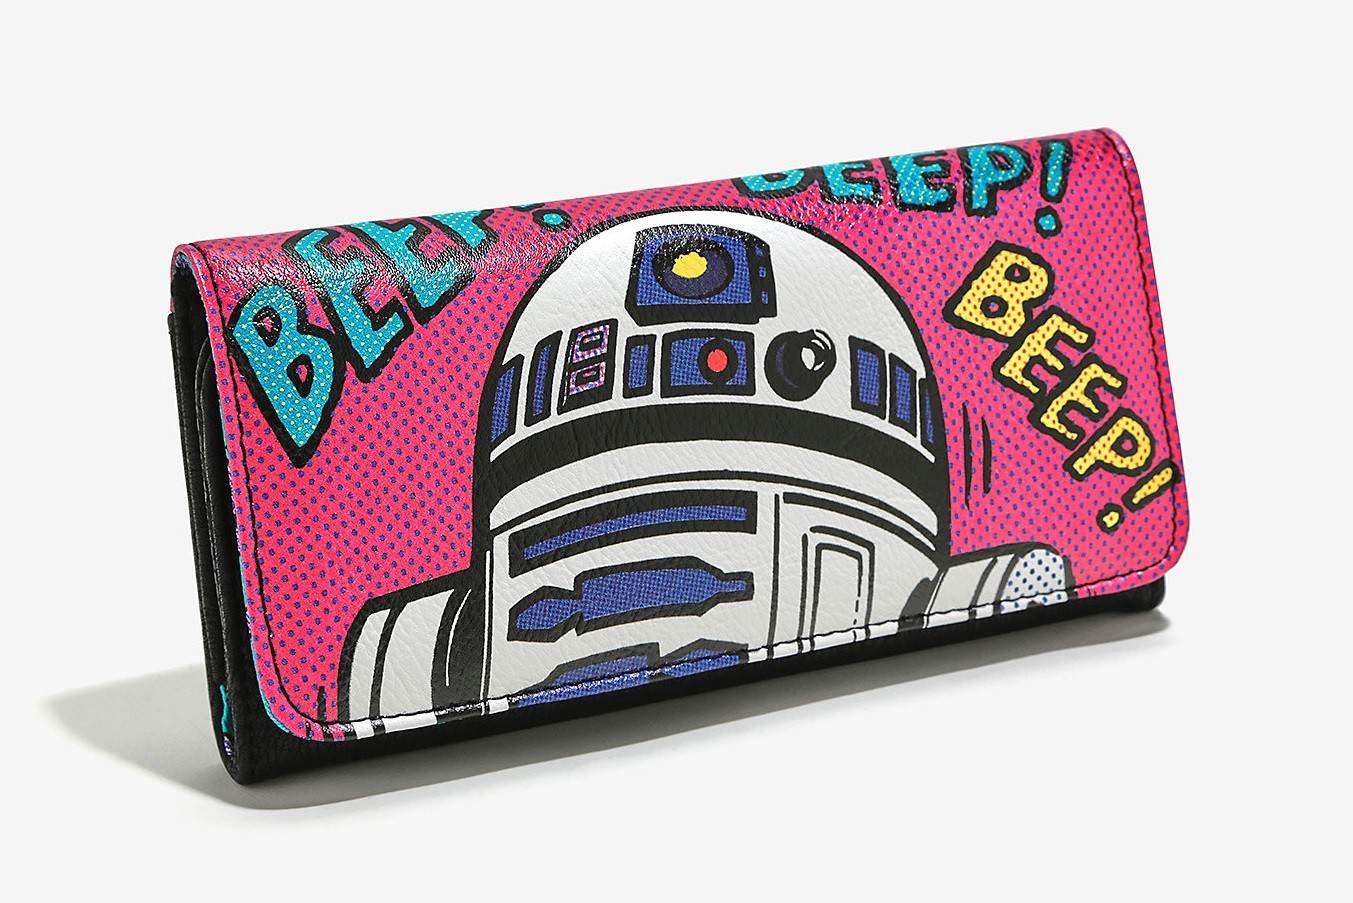 Loungefly R2-D2 comic wallet at Box Lunch